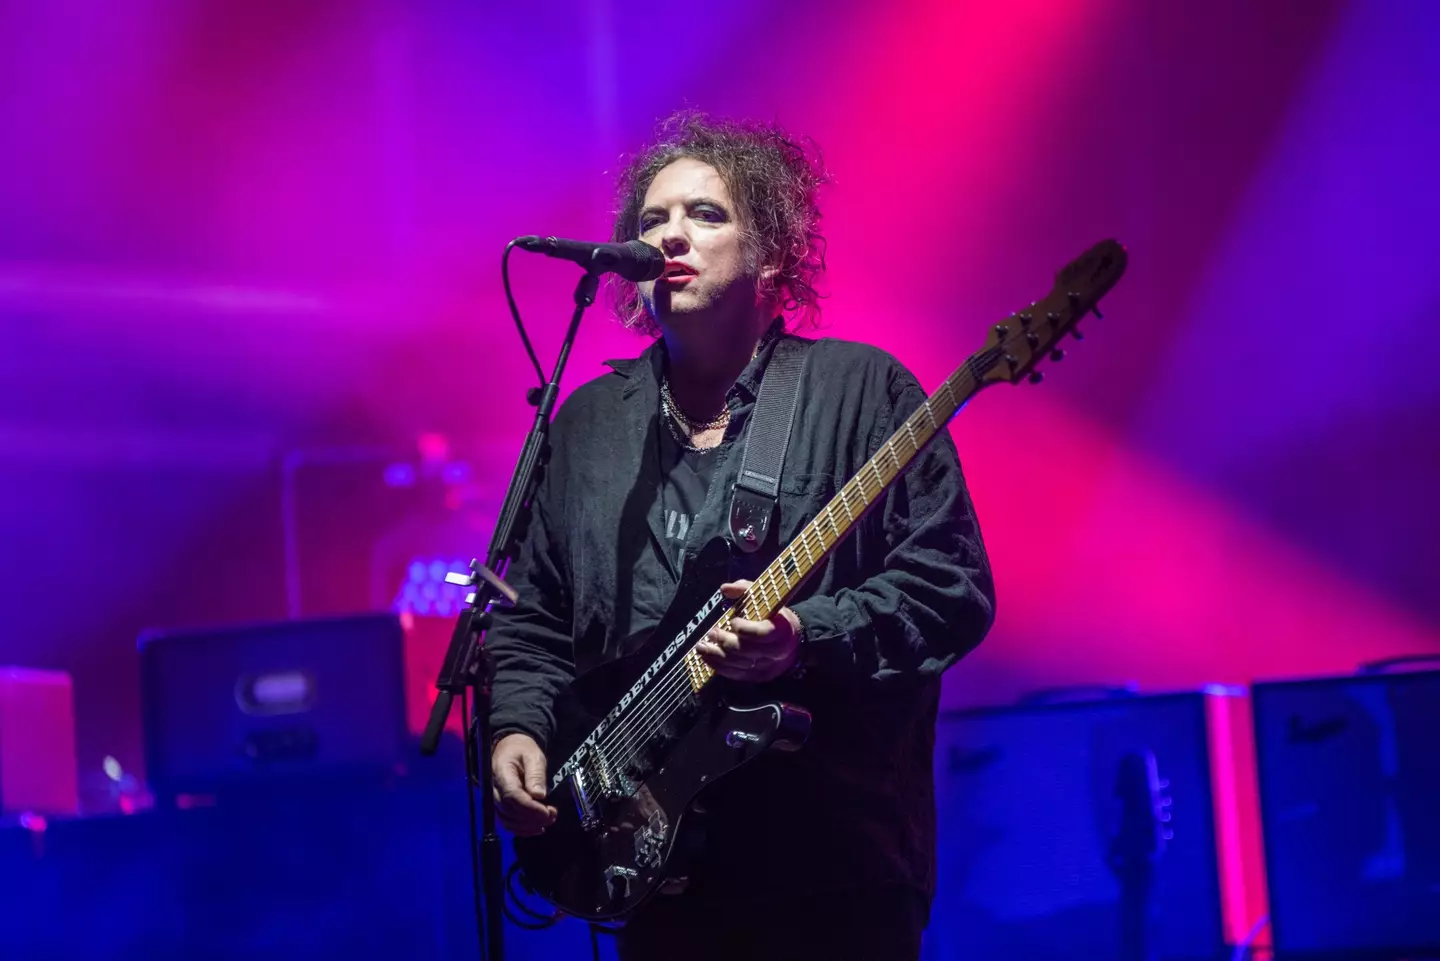 The Cure's frontman has hit out at the fees charged by Ticketmaster.